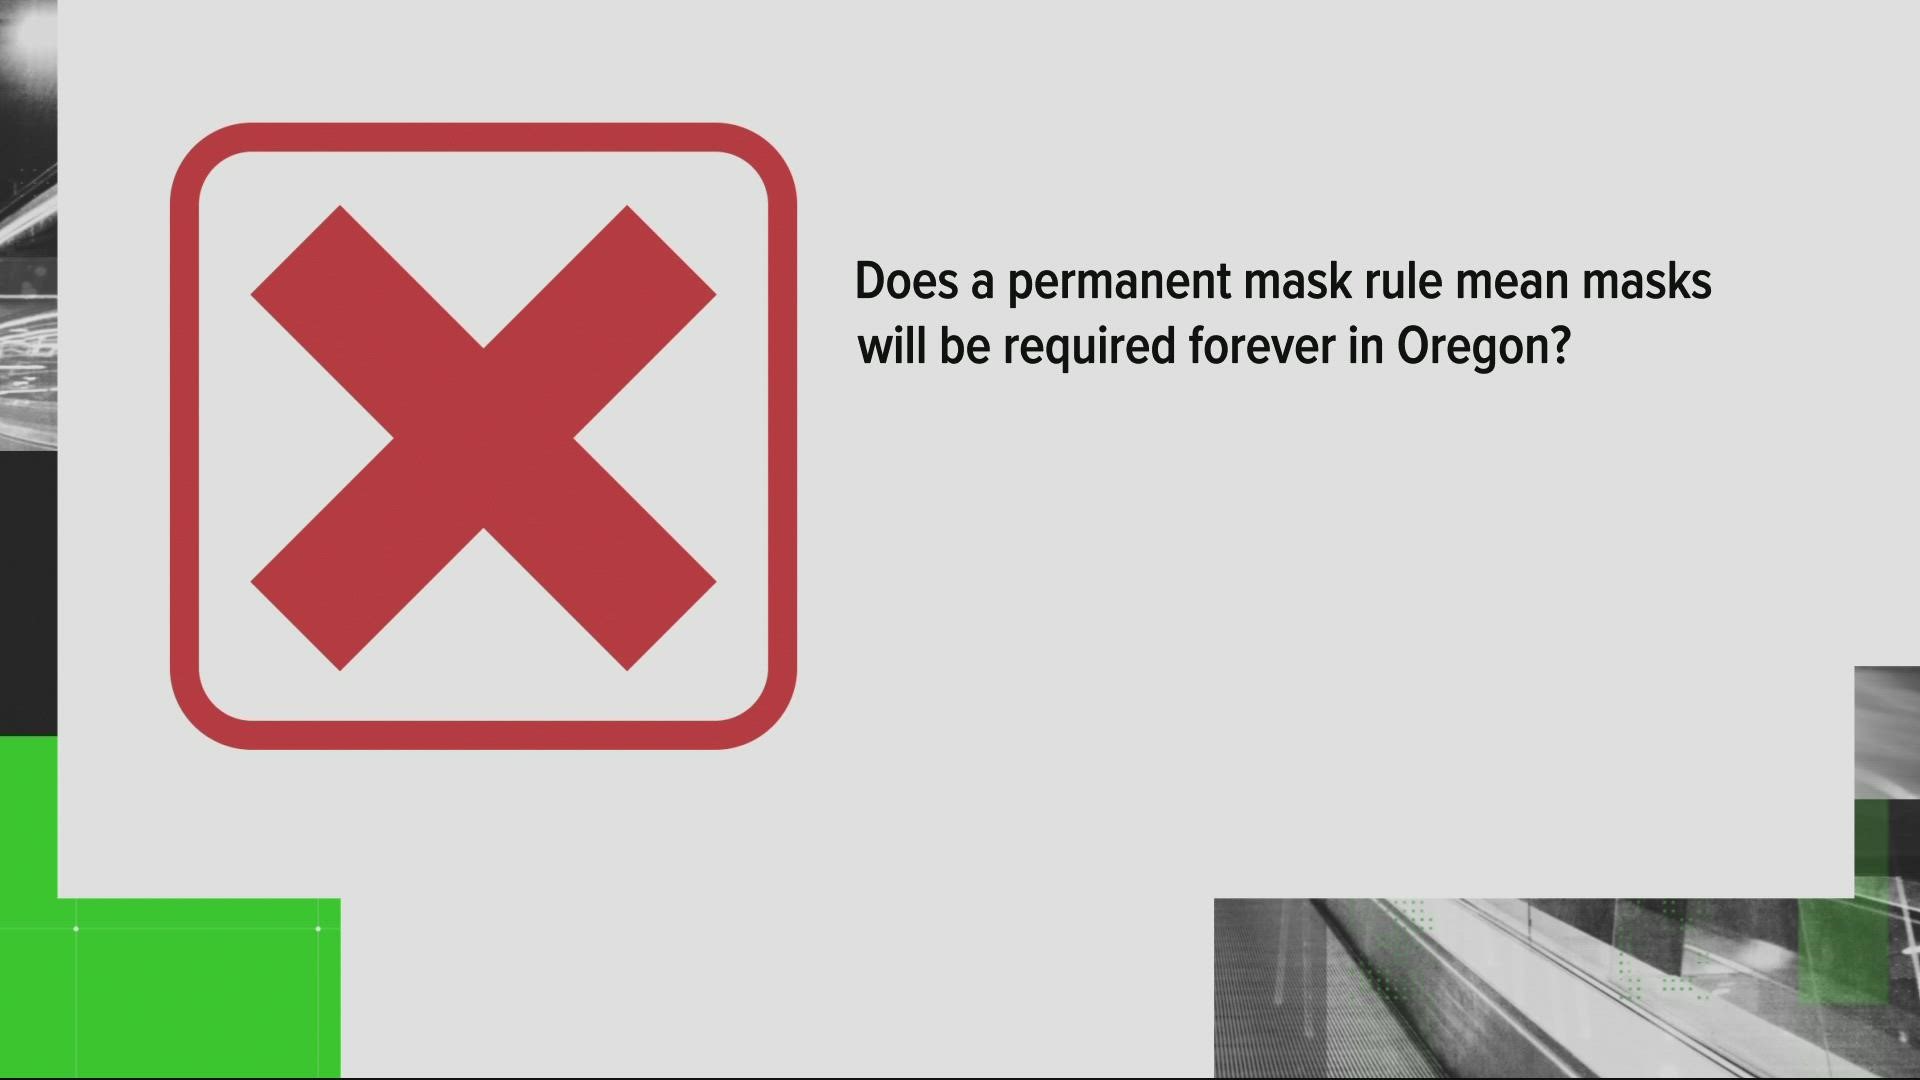 The "permanent" designation means the rule would have no built-in expiration date, but state health officials could still lift it when it's safe to do so.